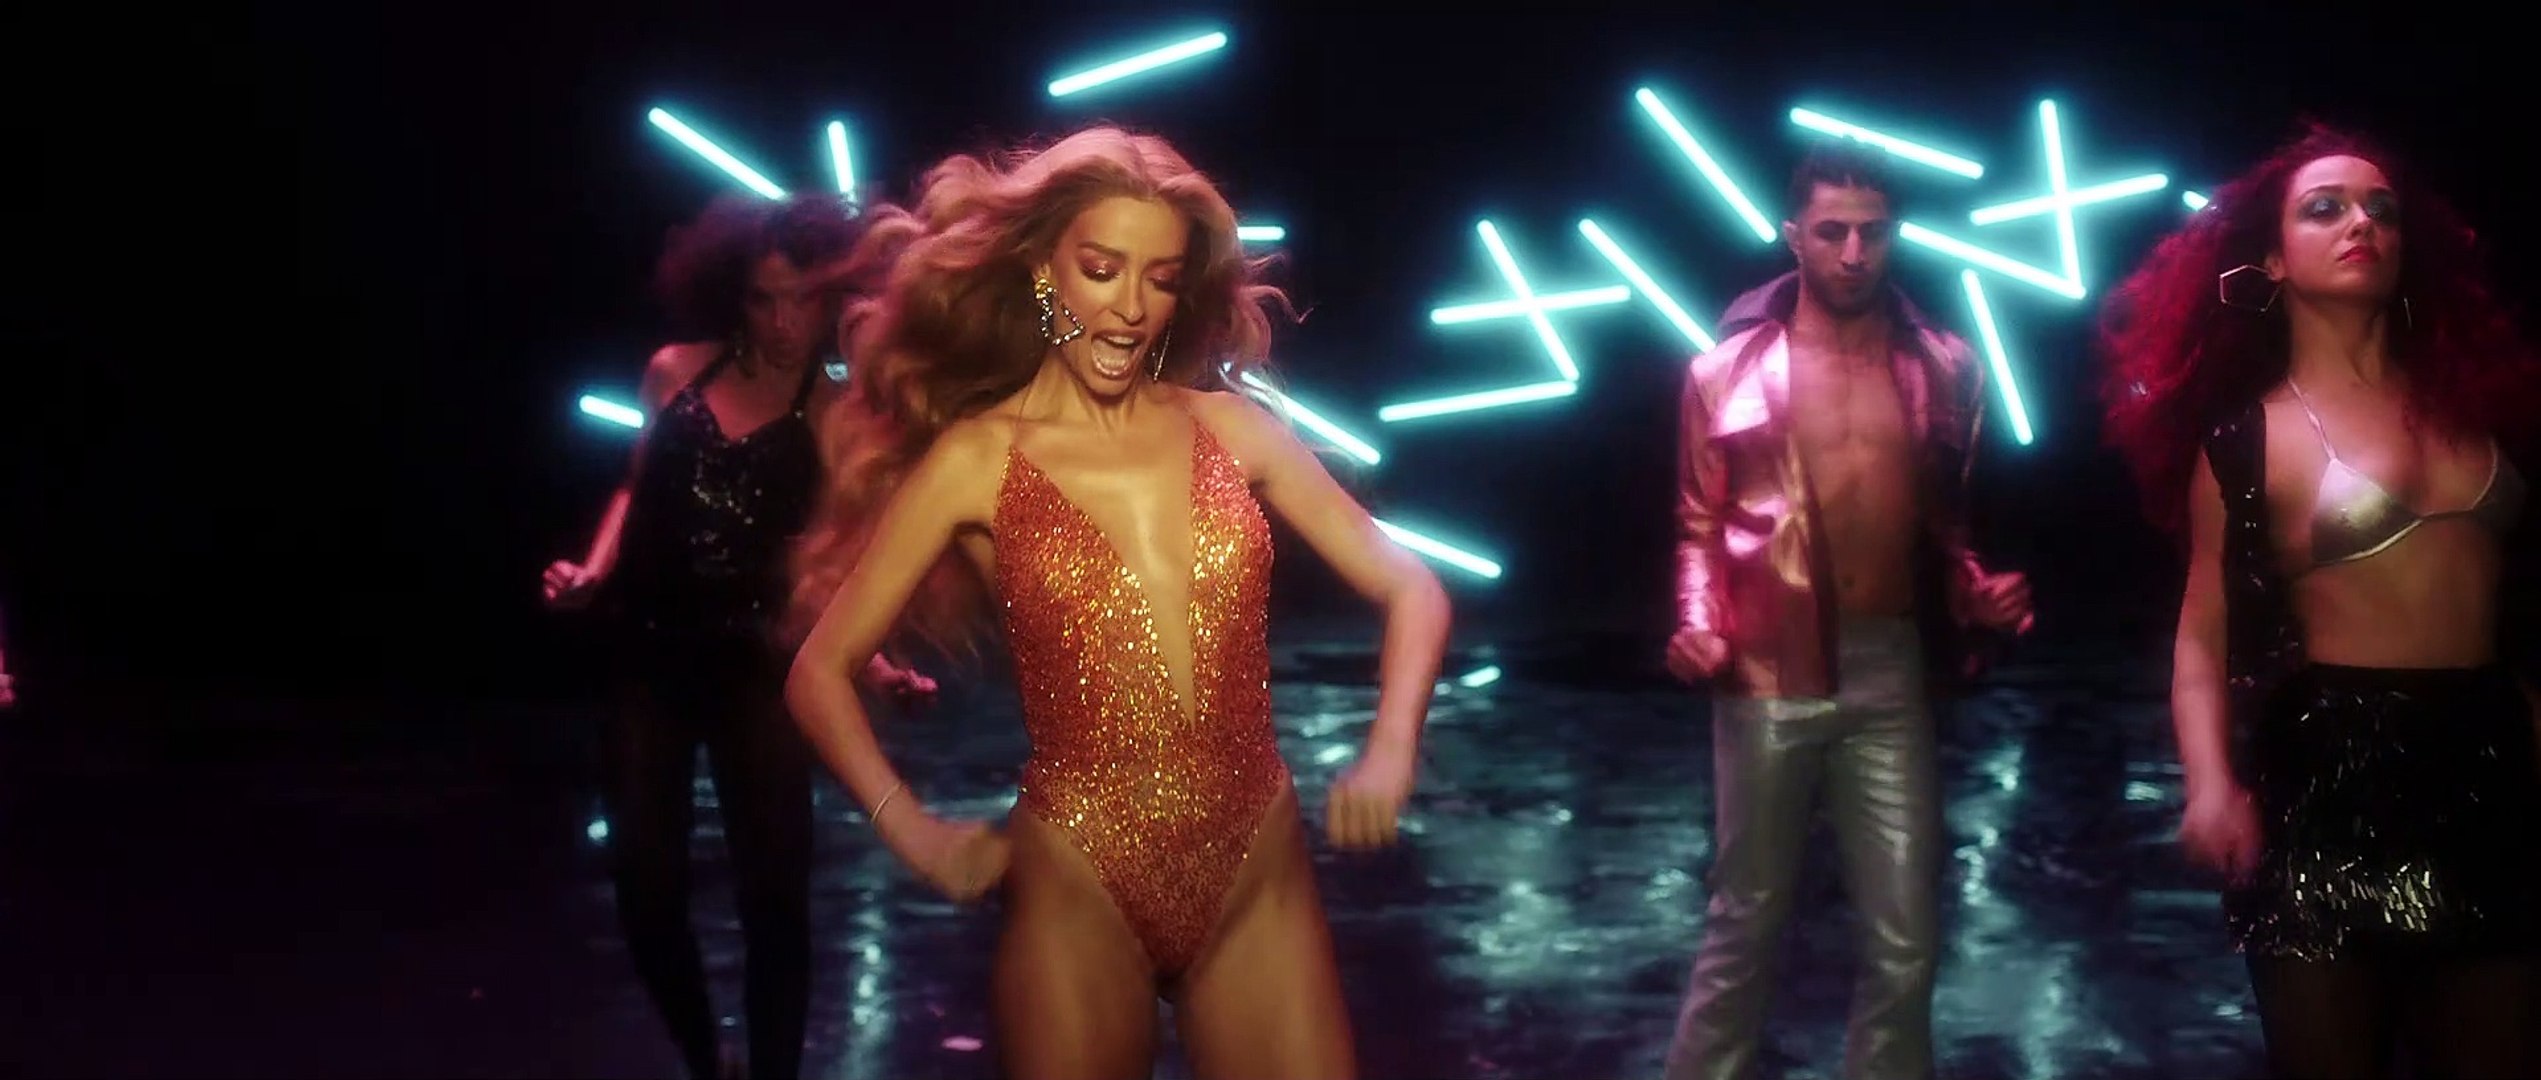 Eleni Foureira - Light It Up (Official Music Video) - video Dailymotion